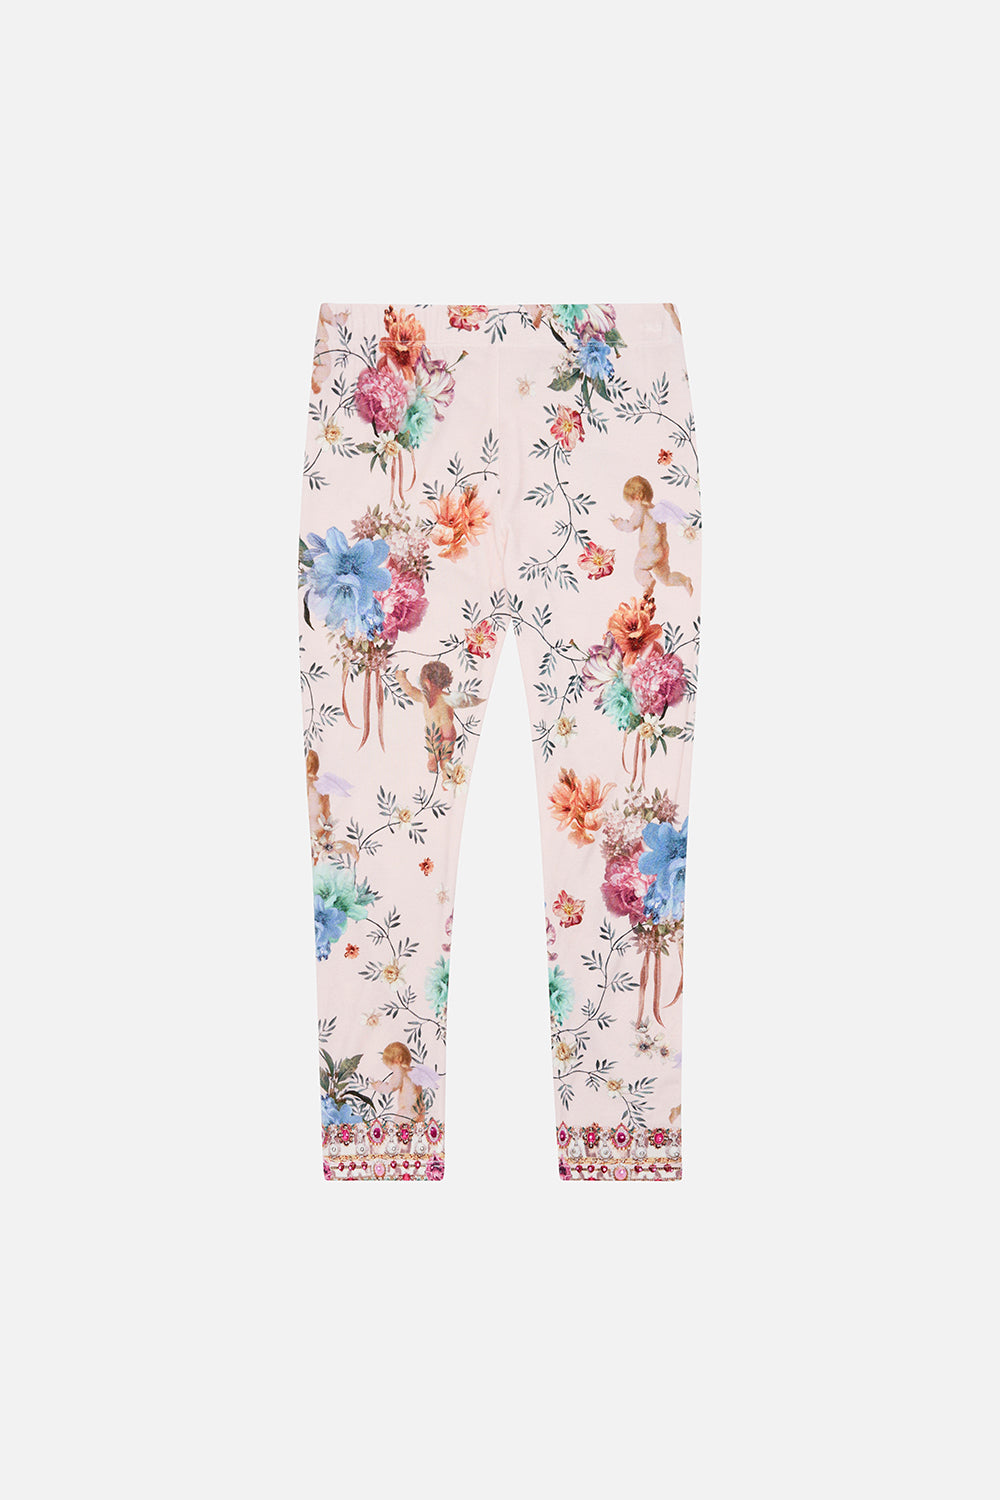 Product view of MILLA BY CAMILLA pink kids leggings in Bambino Bliss print